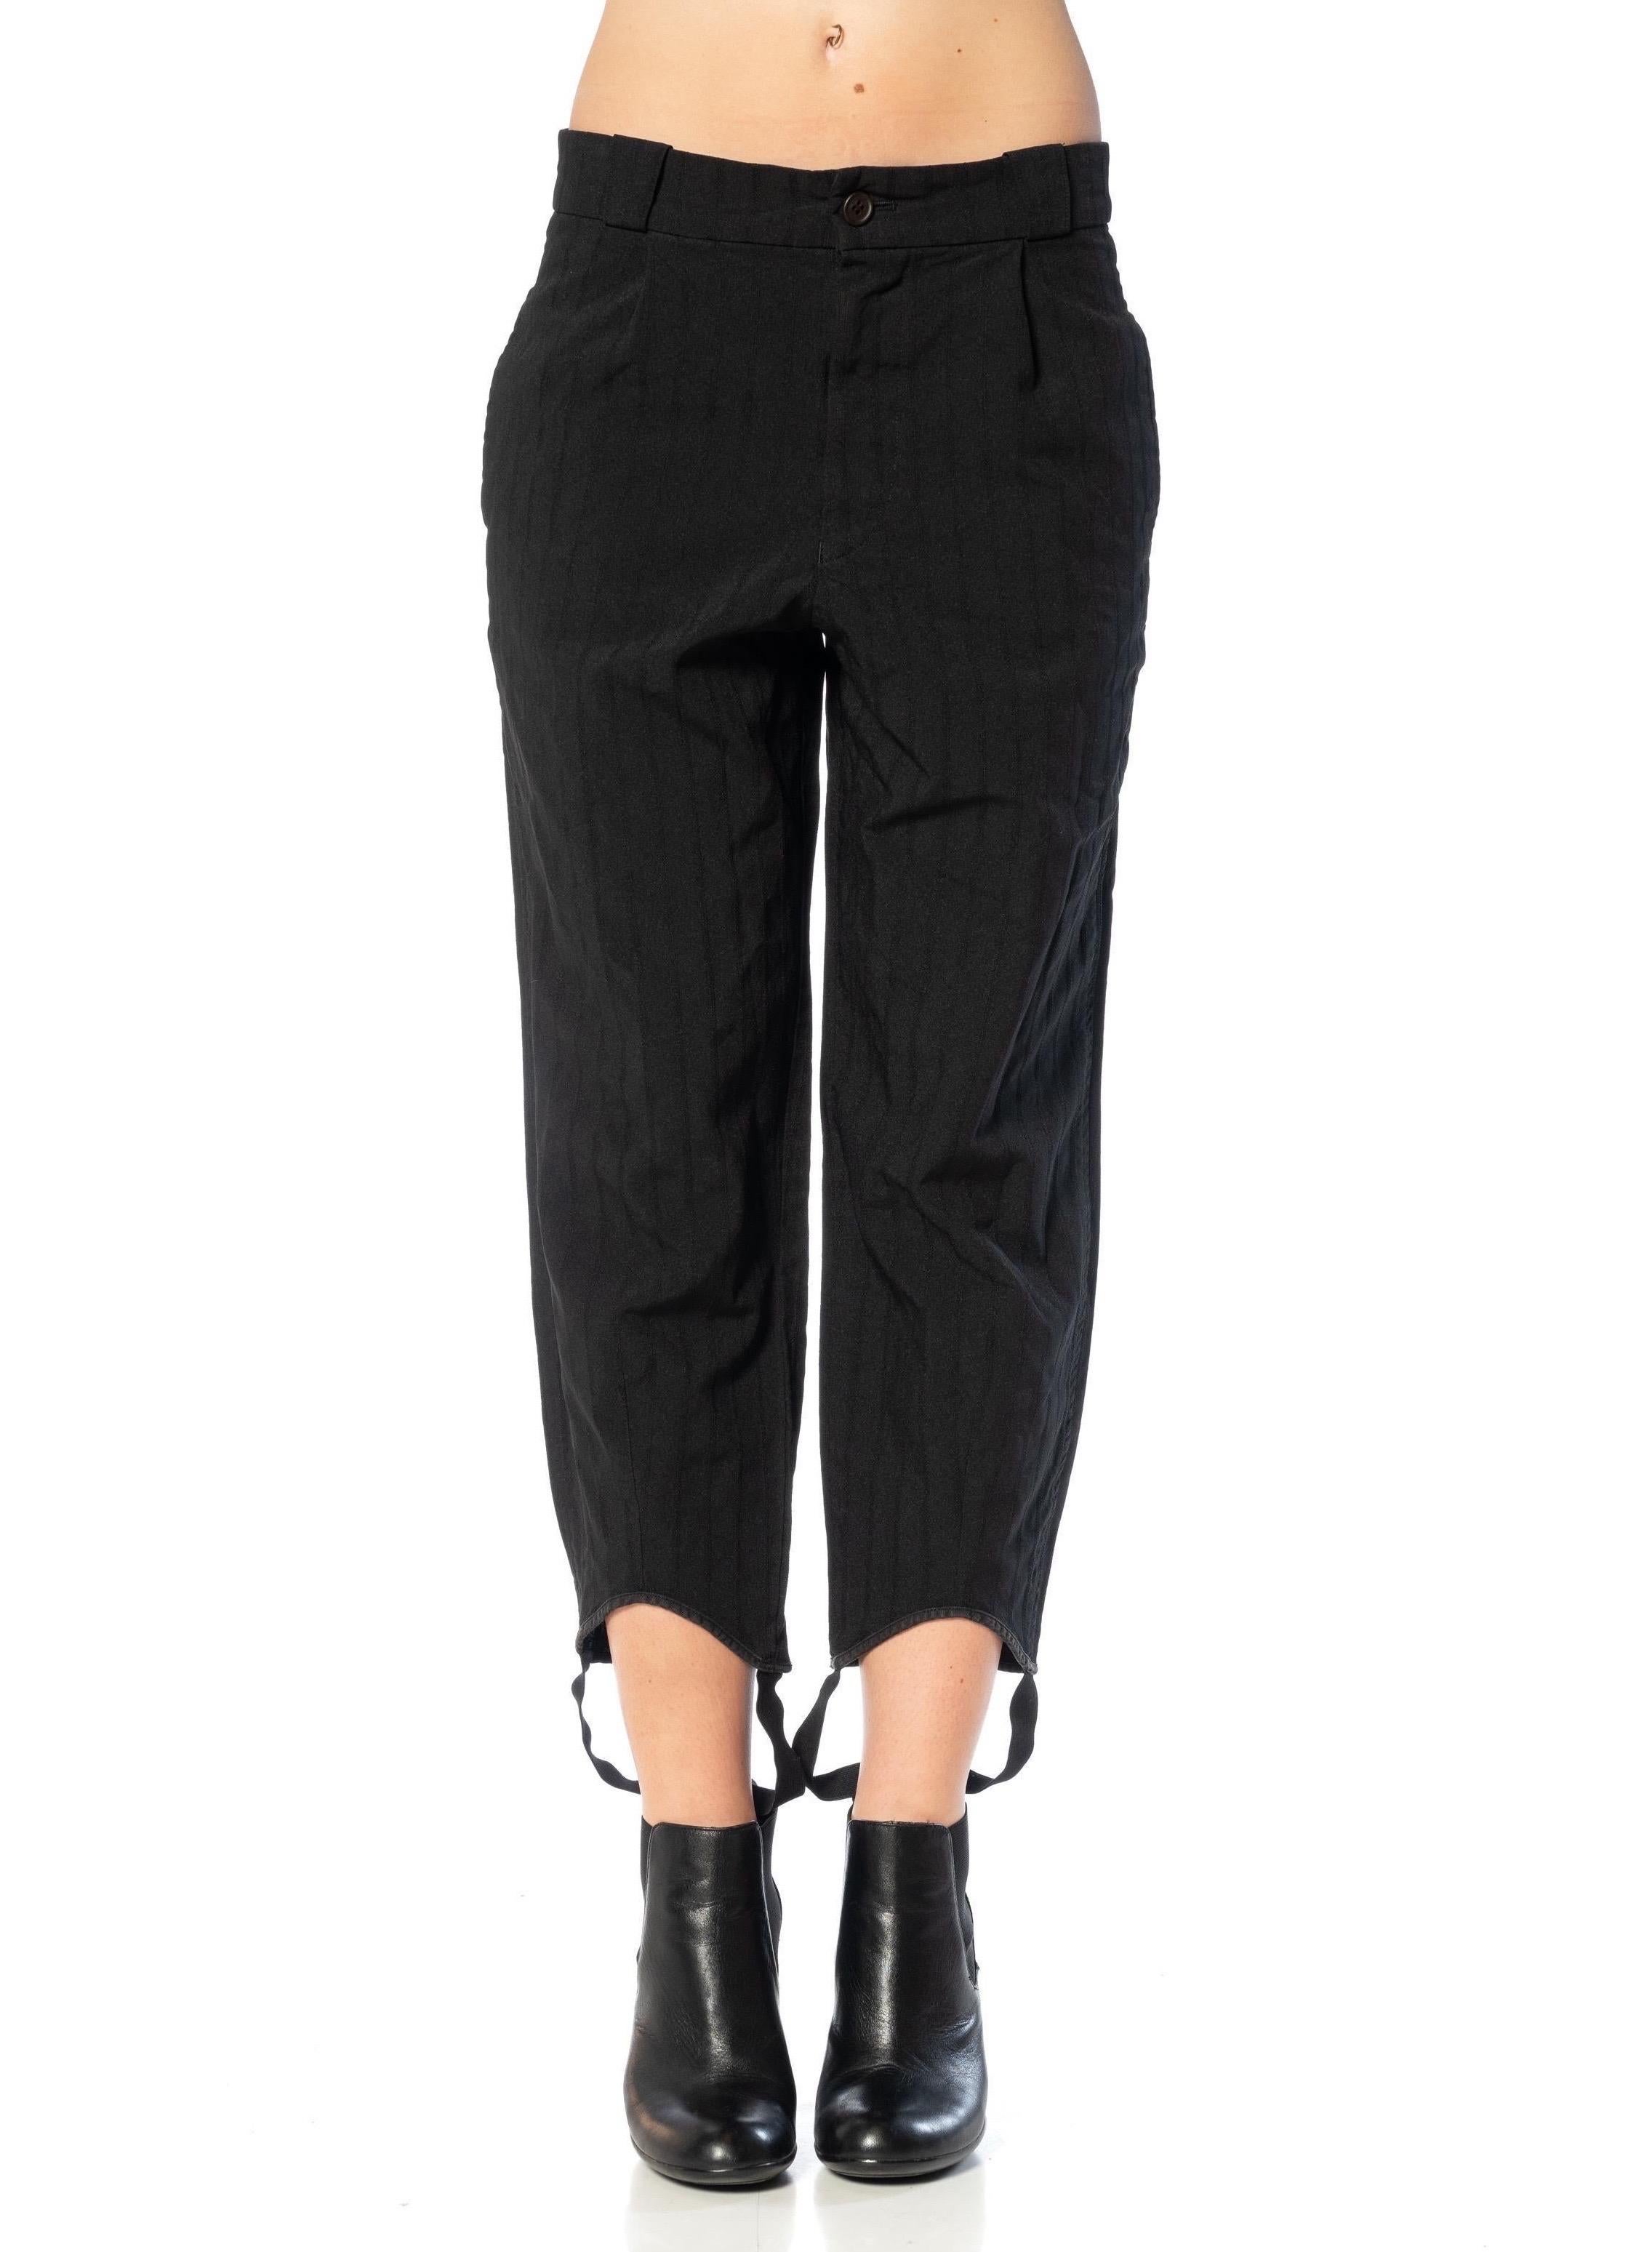 2010S COMME DES GARCONS Black Striped Polyester Crinkle Stripe Pants With Foot  For Sale 6